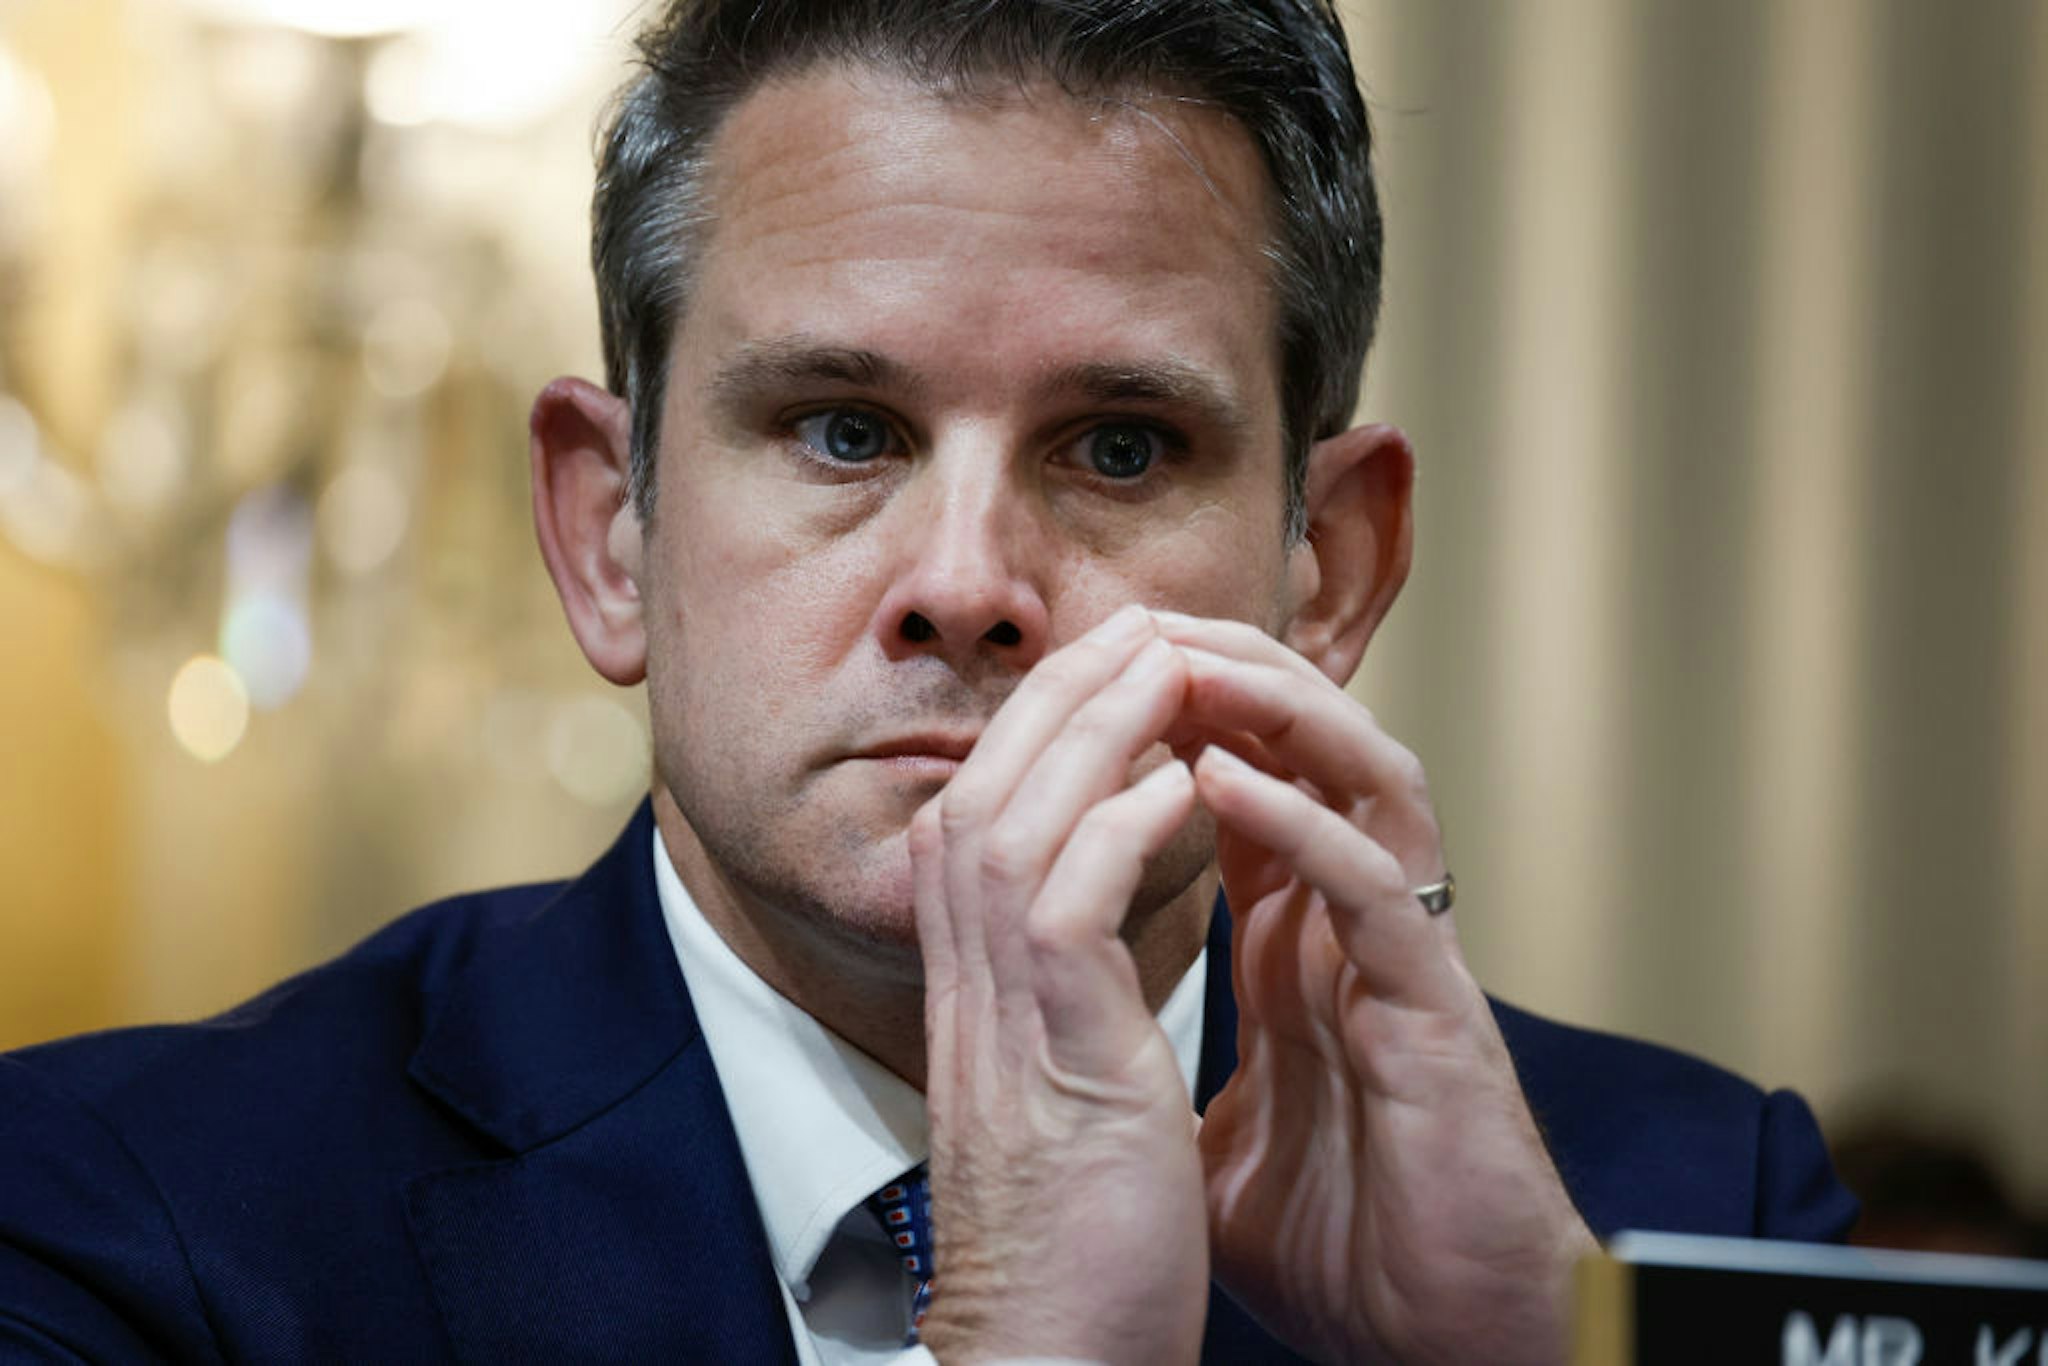 WASHINGTON, DC - JUNE 16: U.S. Rep. Adam Kinzinger (R-IN) listens during the third hearing by the Select Committee to Investigate the January 6th Attack on the U.S. Capitol in the Cannon House Office Building on June 16, 2022 in Washington, DC. The bipartisan committee, which has been gathering evidence for almost a year related to the January 6 attack at the U.S. Capitol, is presenting its findings in a series of televised hearings. On January 6, 2021, supporters of former President Donald Trump attacked the U.S. Capitol Building during an attempt to disrupt a congressional vote to confirm the electoral college win for President Joe Biden. (Photo by Anna Moneymaker/Getty Images)